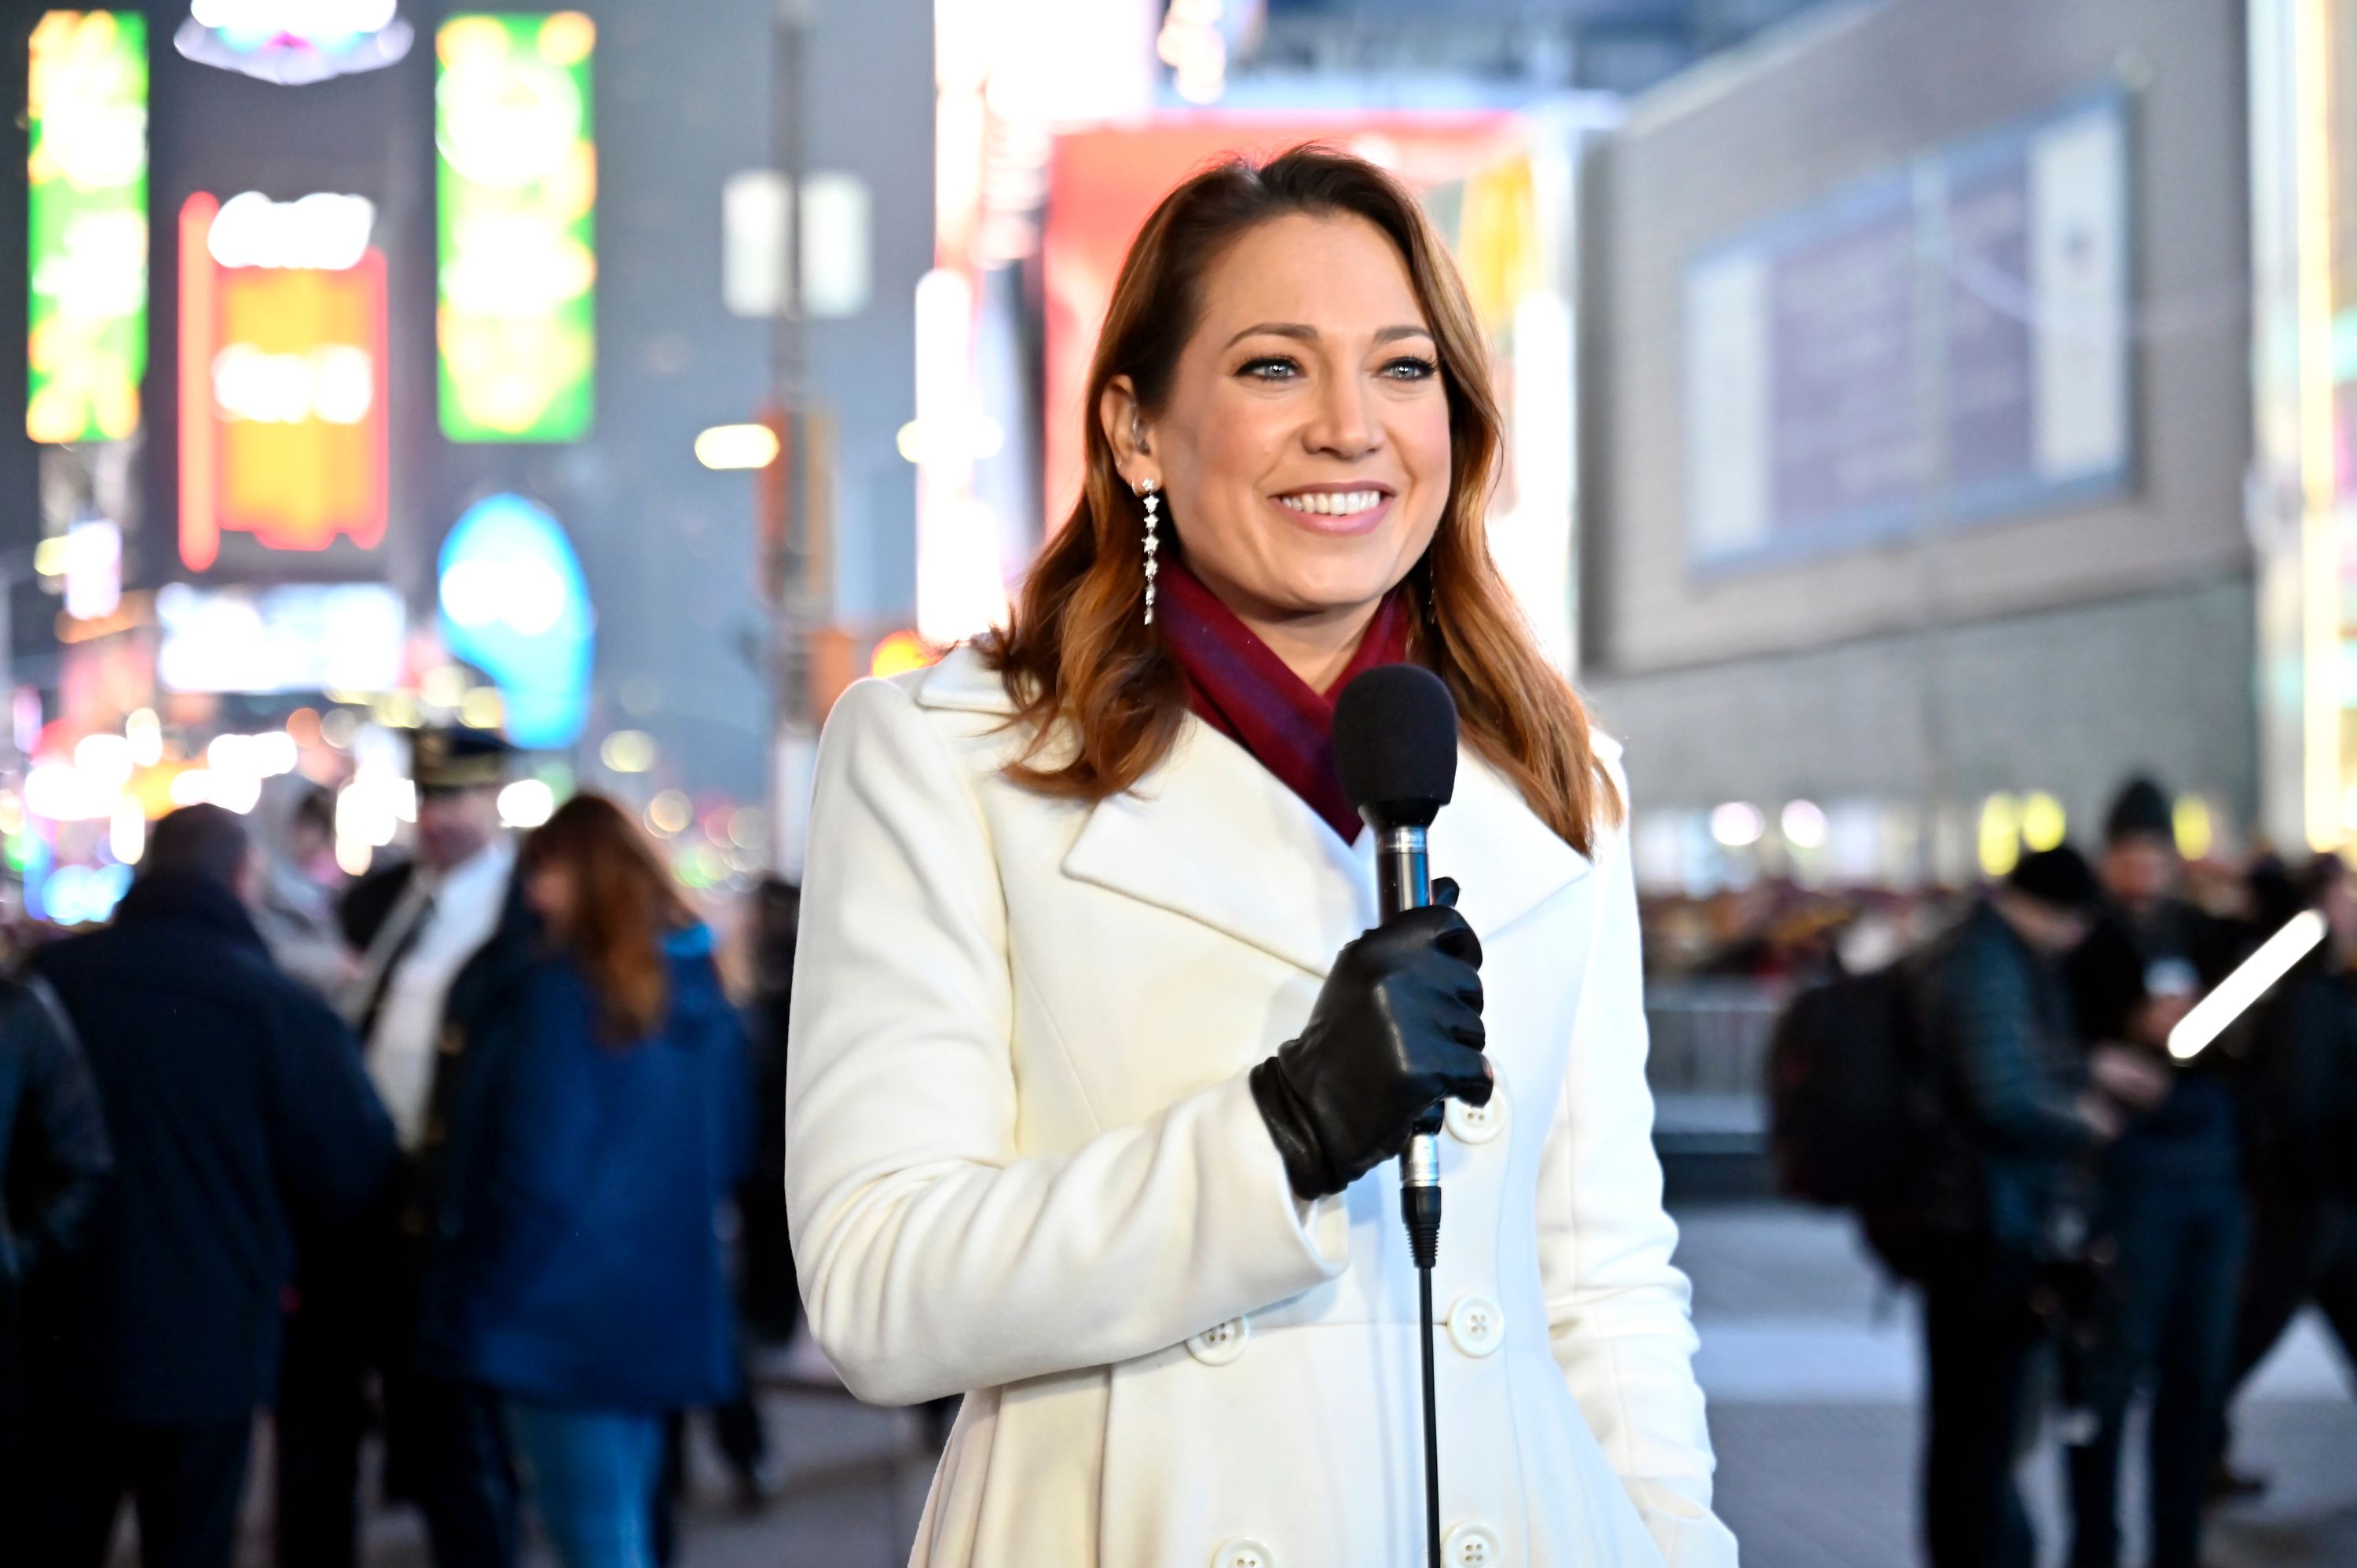 Ginger Zee on ABC's "Dick Clark's New Year's Rockin' Eve with Ryan Seacrest 2020." on December 31, 2019. | Photo: Getty Images